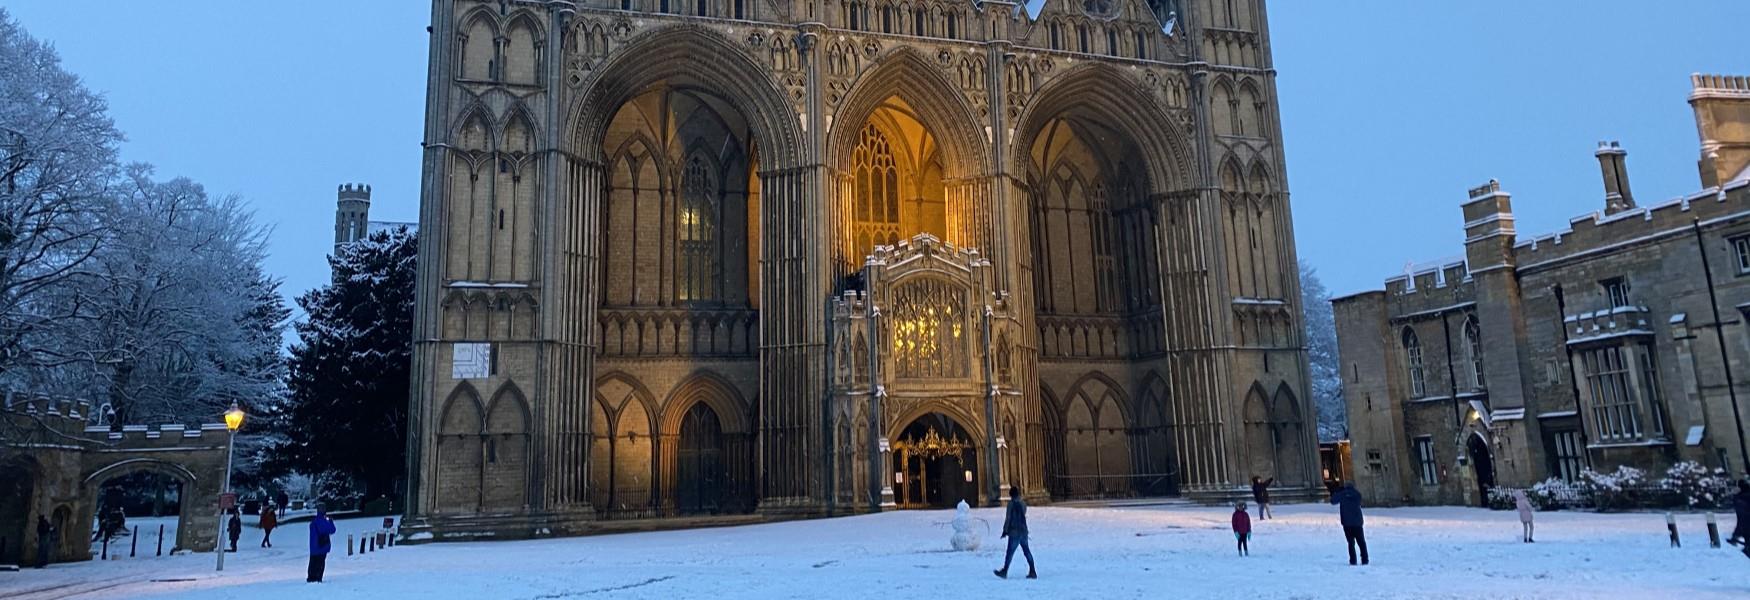 Peterborough cathedral west front in the snow